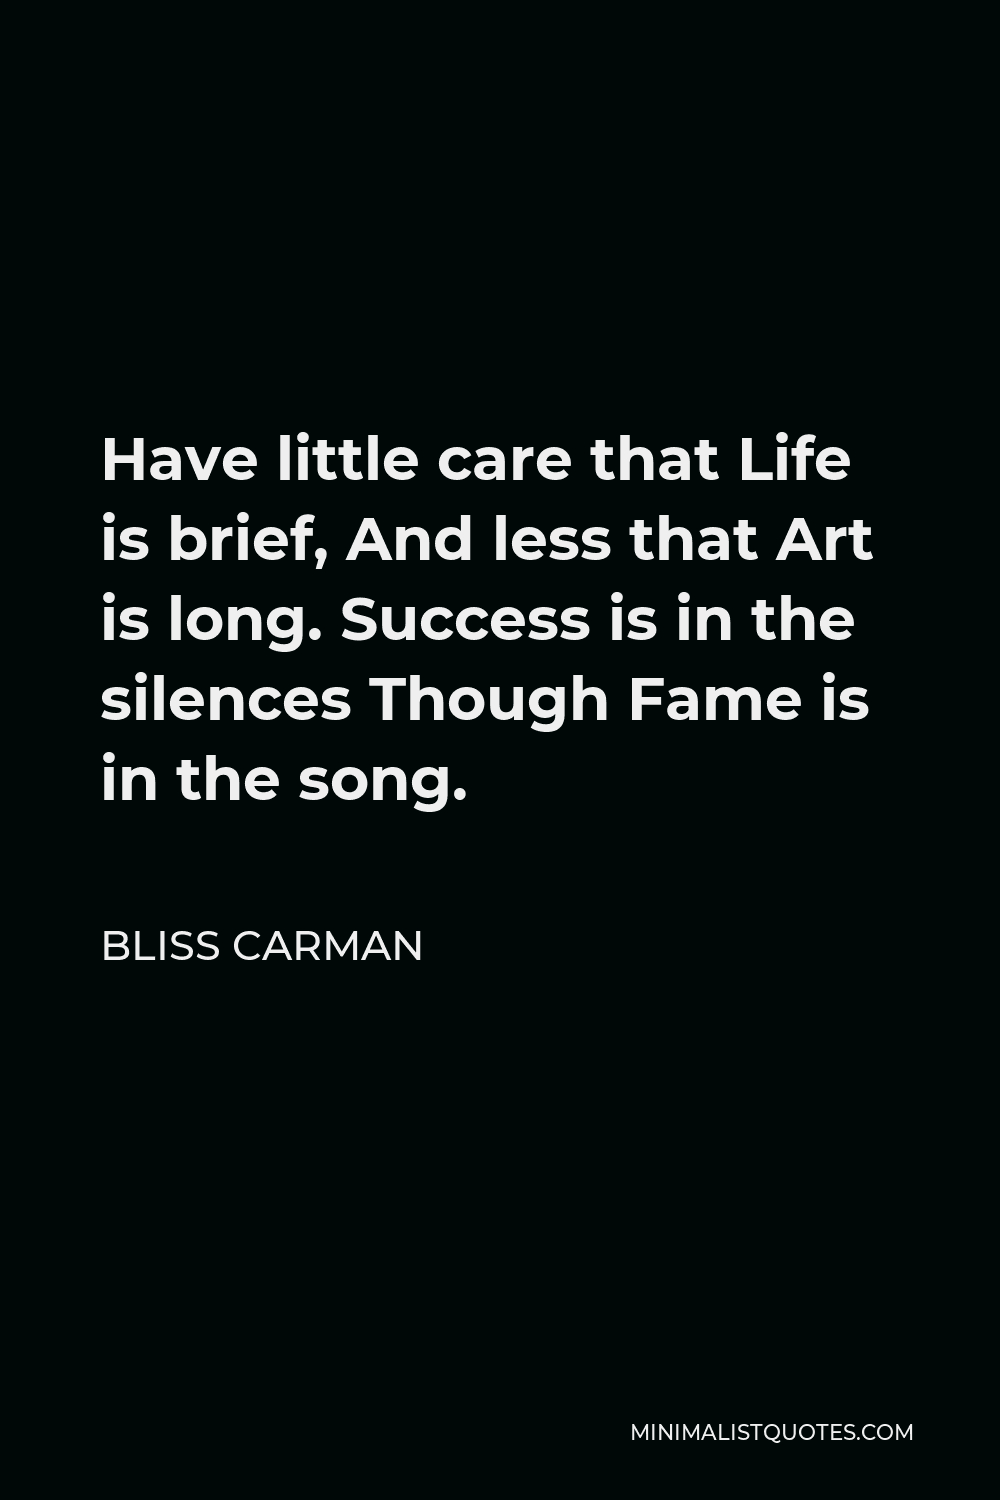 Bliss Carman Quote - Have little care that Life is brief, And less that Art is long. Success is in the silences Though Fame is in the song.